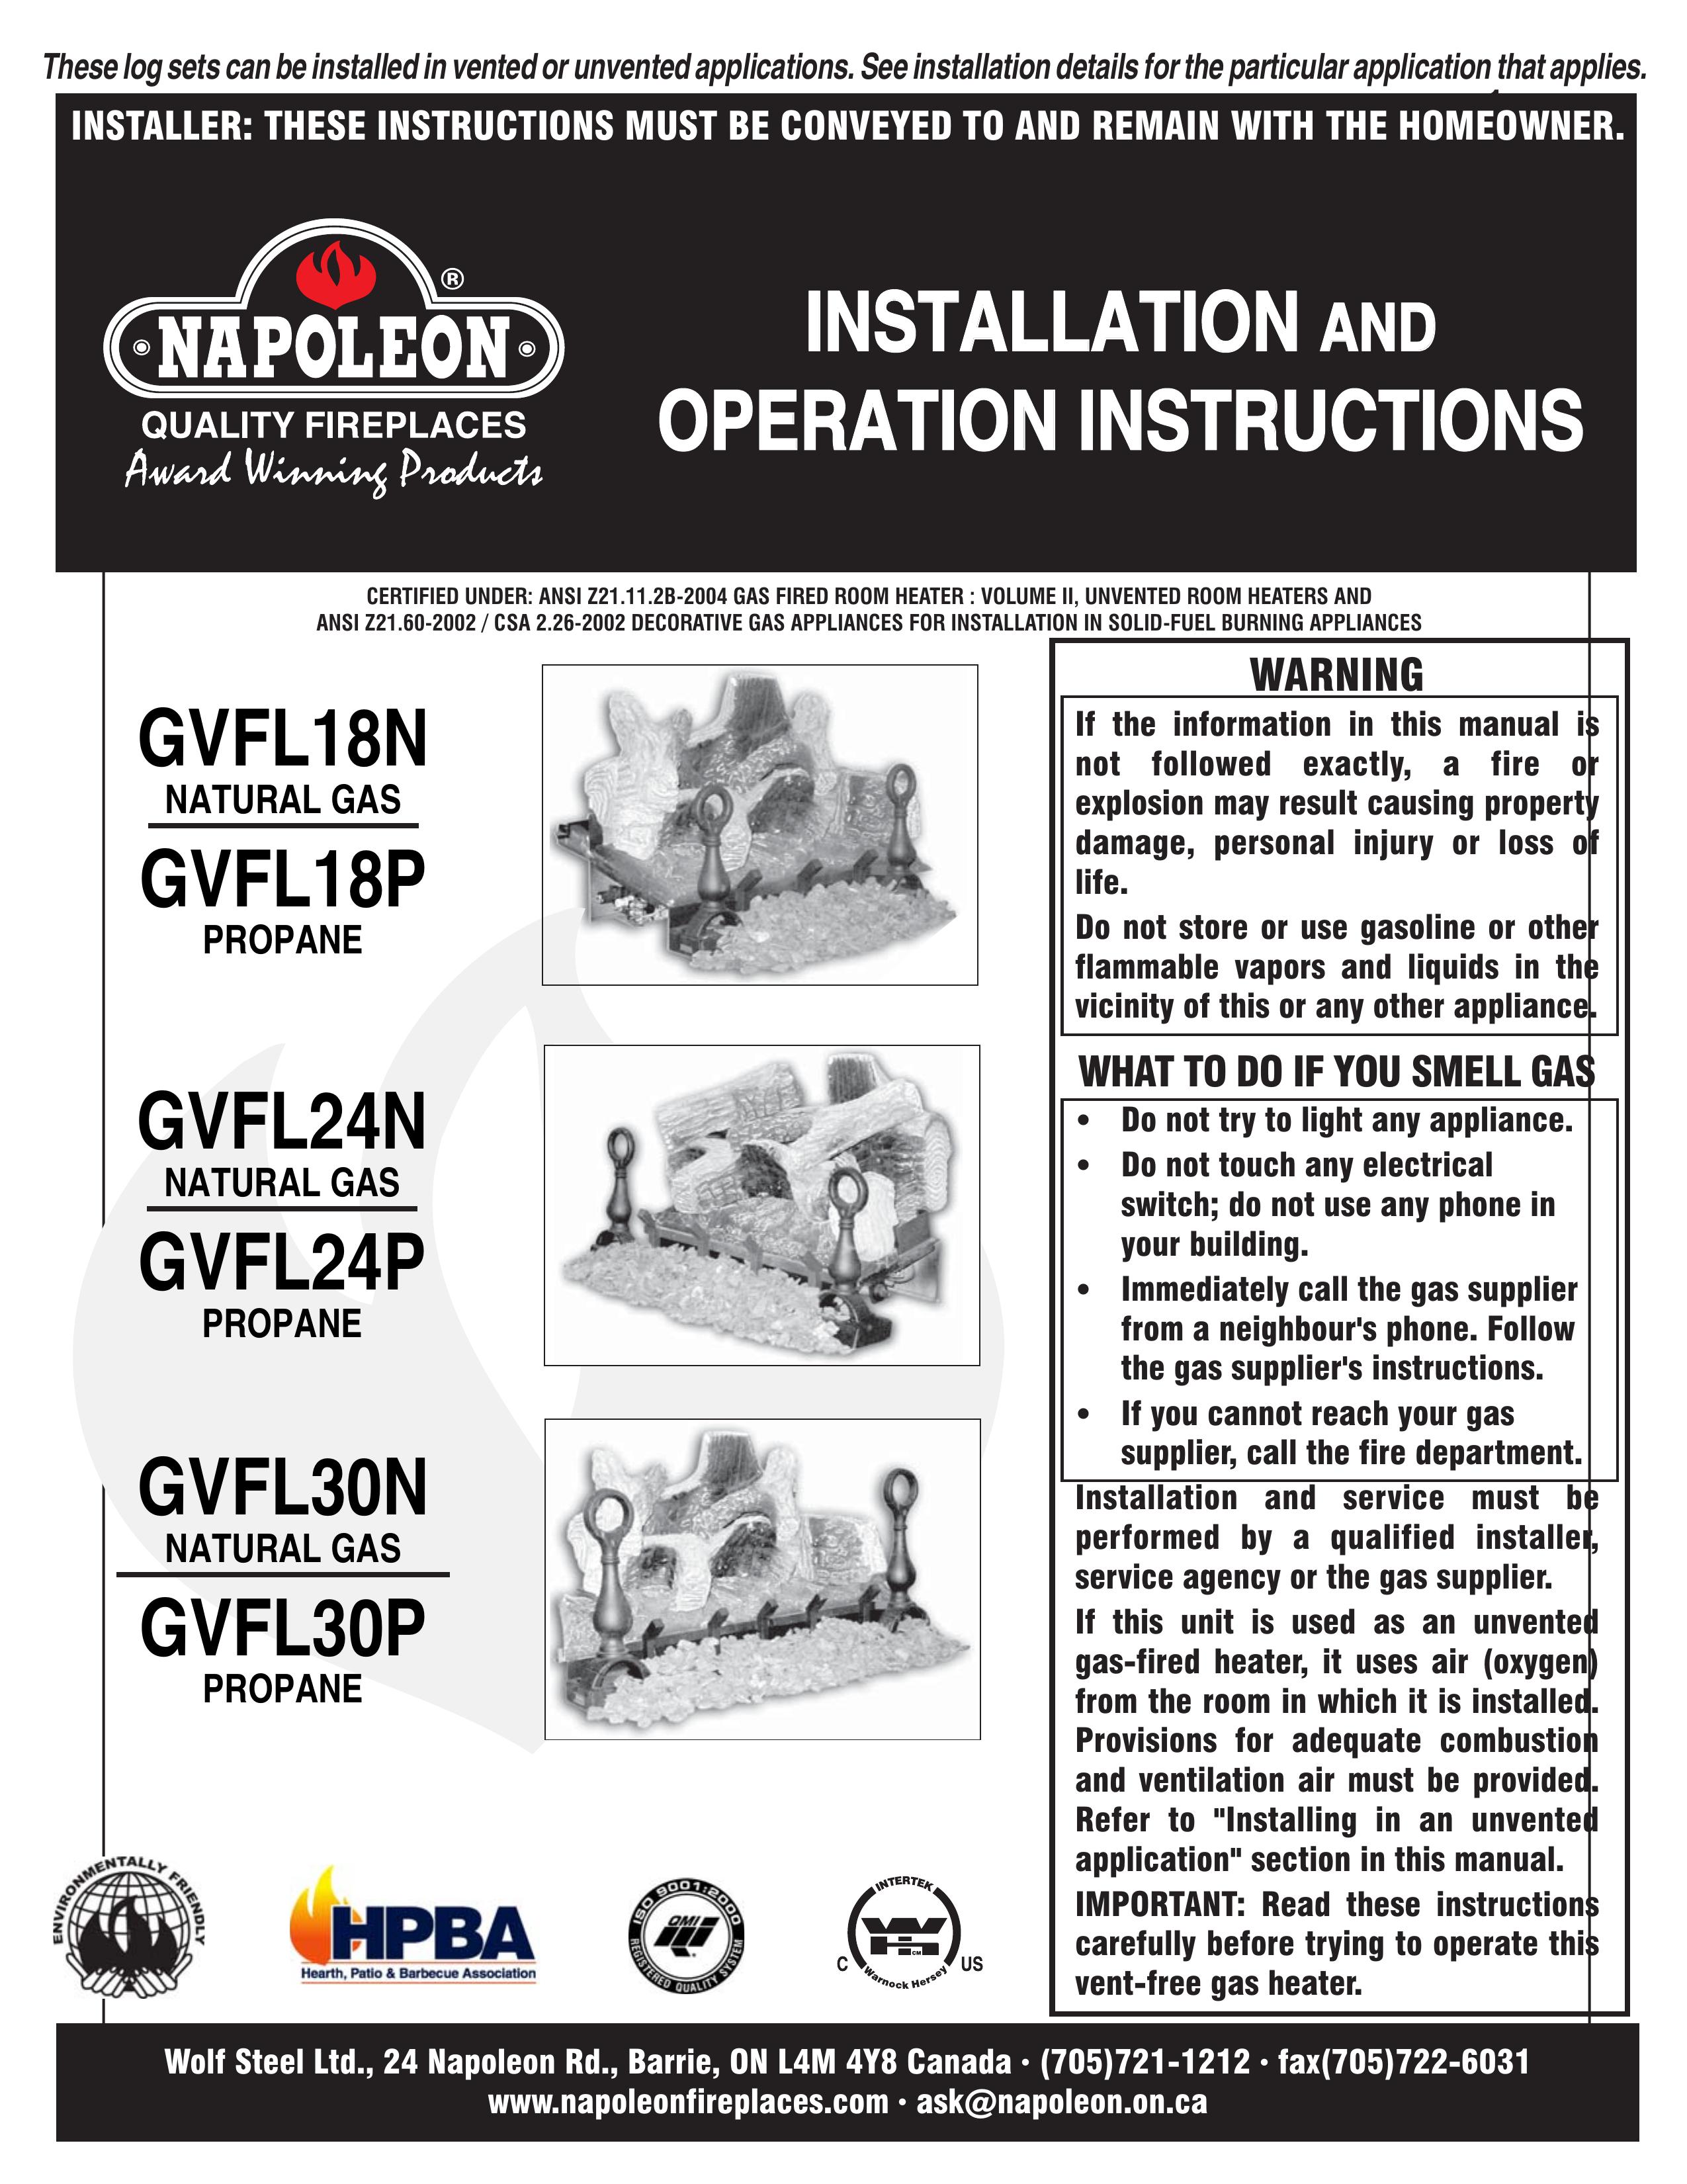 Napoleon Fireplaces GLVF18N Fire Pit User Manual